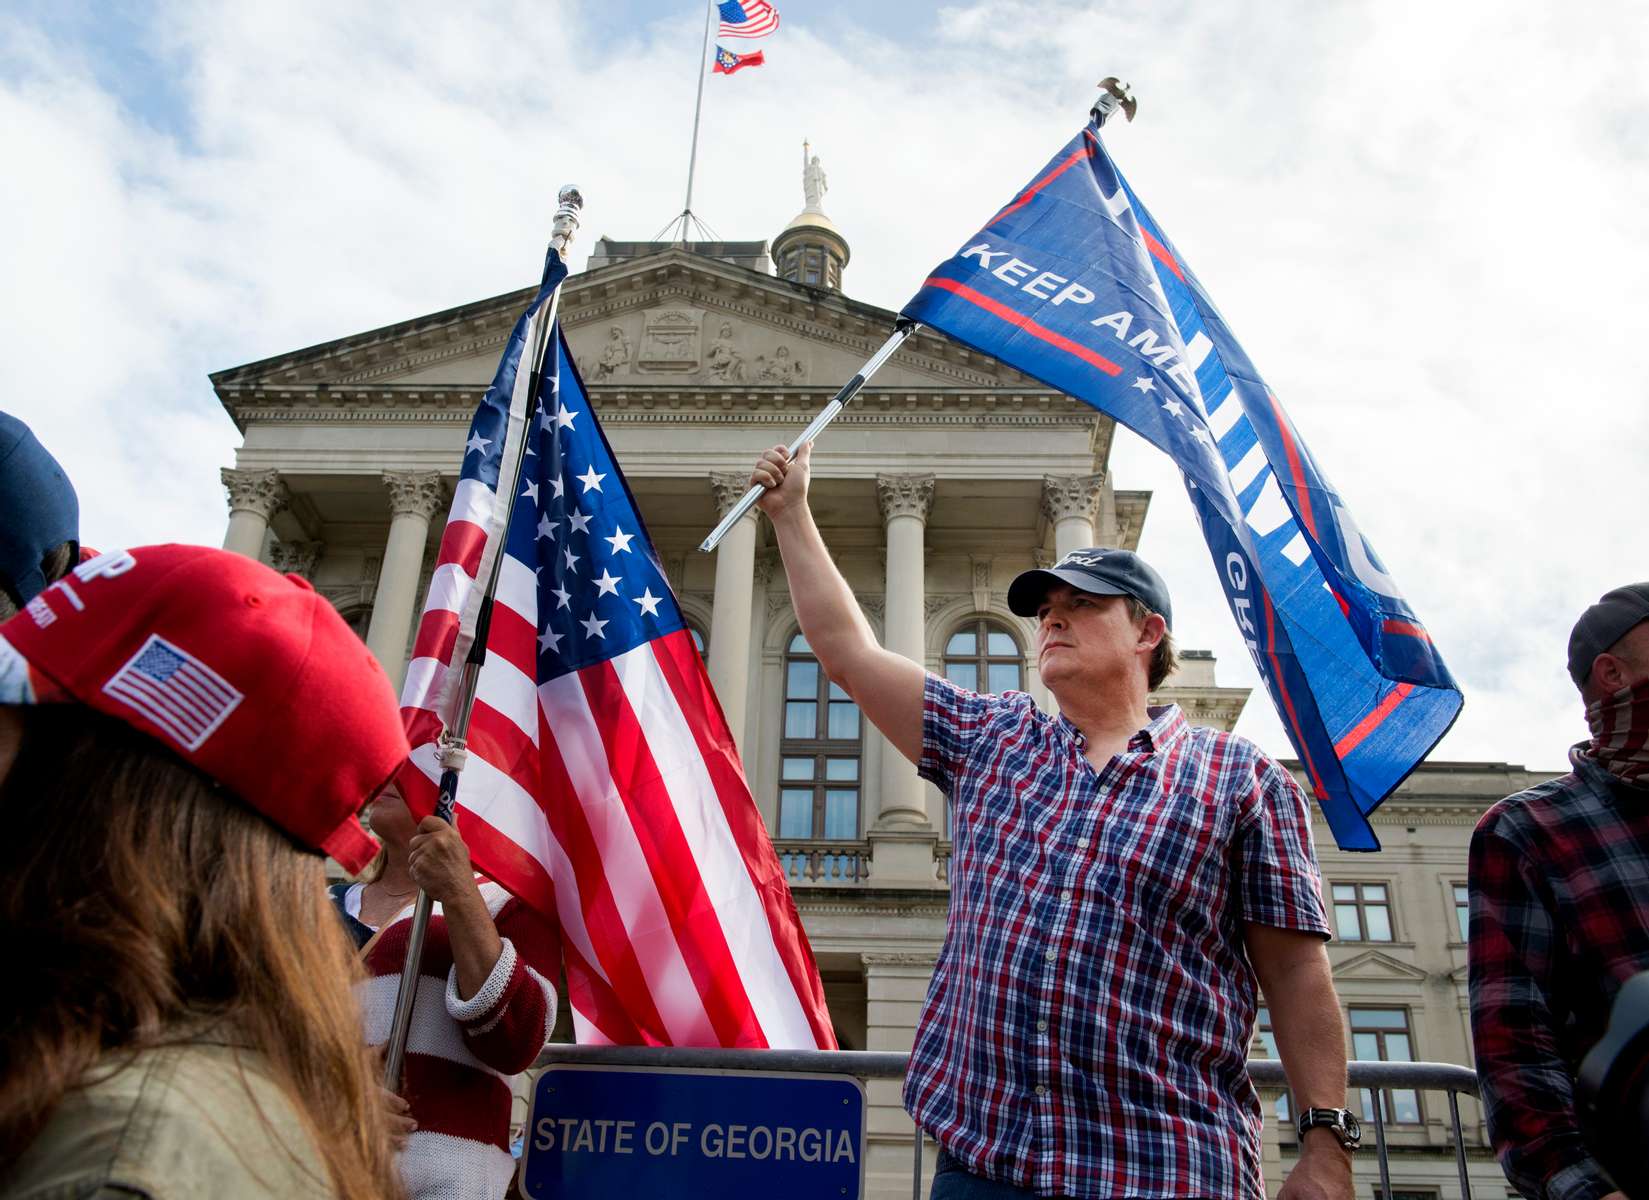 Republican Trump supporters protest what they claim are illegal mail-in votes in Georgia election at ‘Stop the Steal’ demonstration outside Georgia statehouse Saturday, at the same time hour former Vice President Joe Biden was declared  unofficial winner of 2020 presidential election.